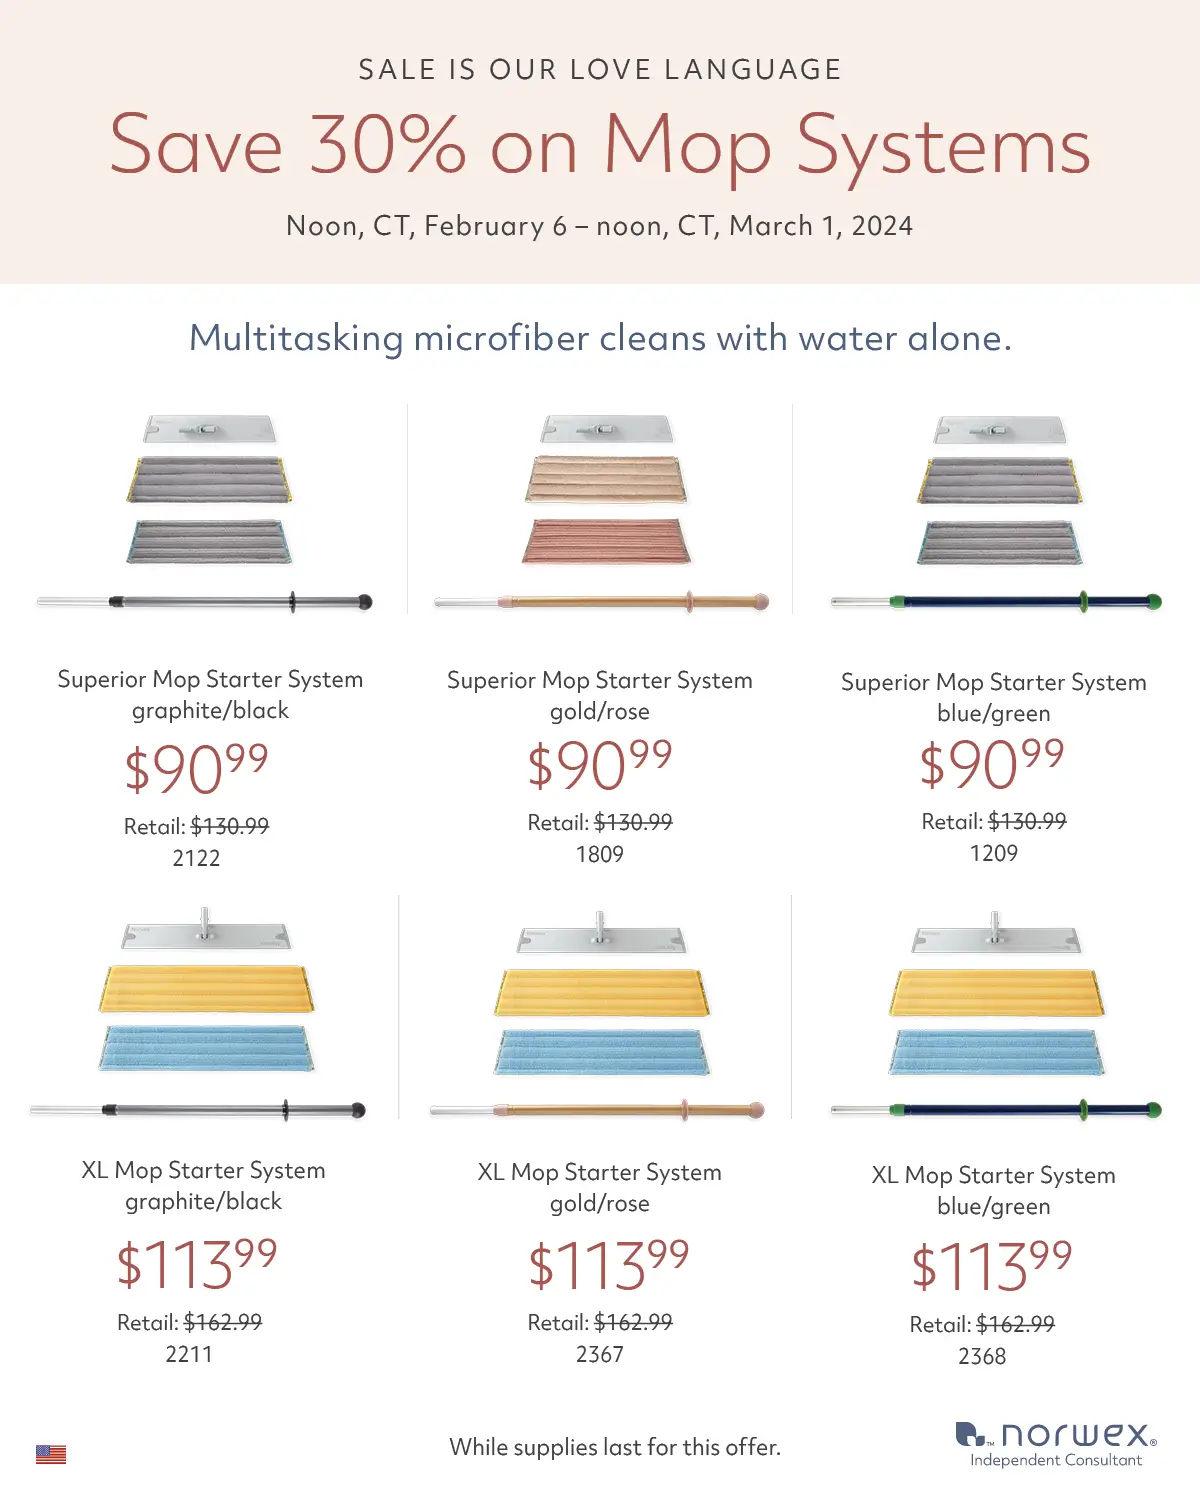 Save 30% on Norwex Mop Systems | Norwex Flash Sale February 6 - March 1, 2024